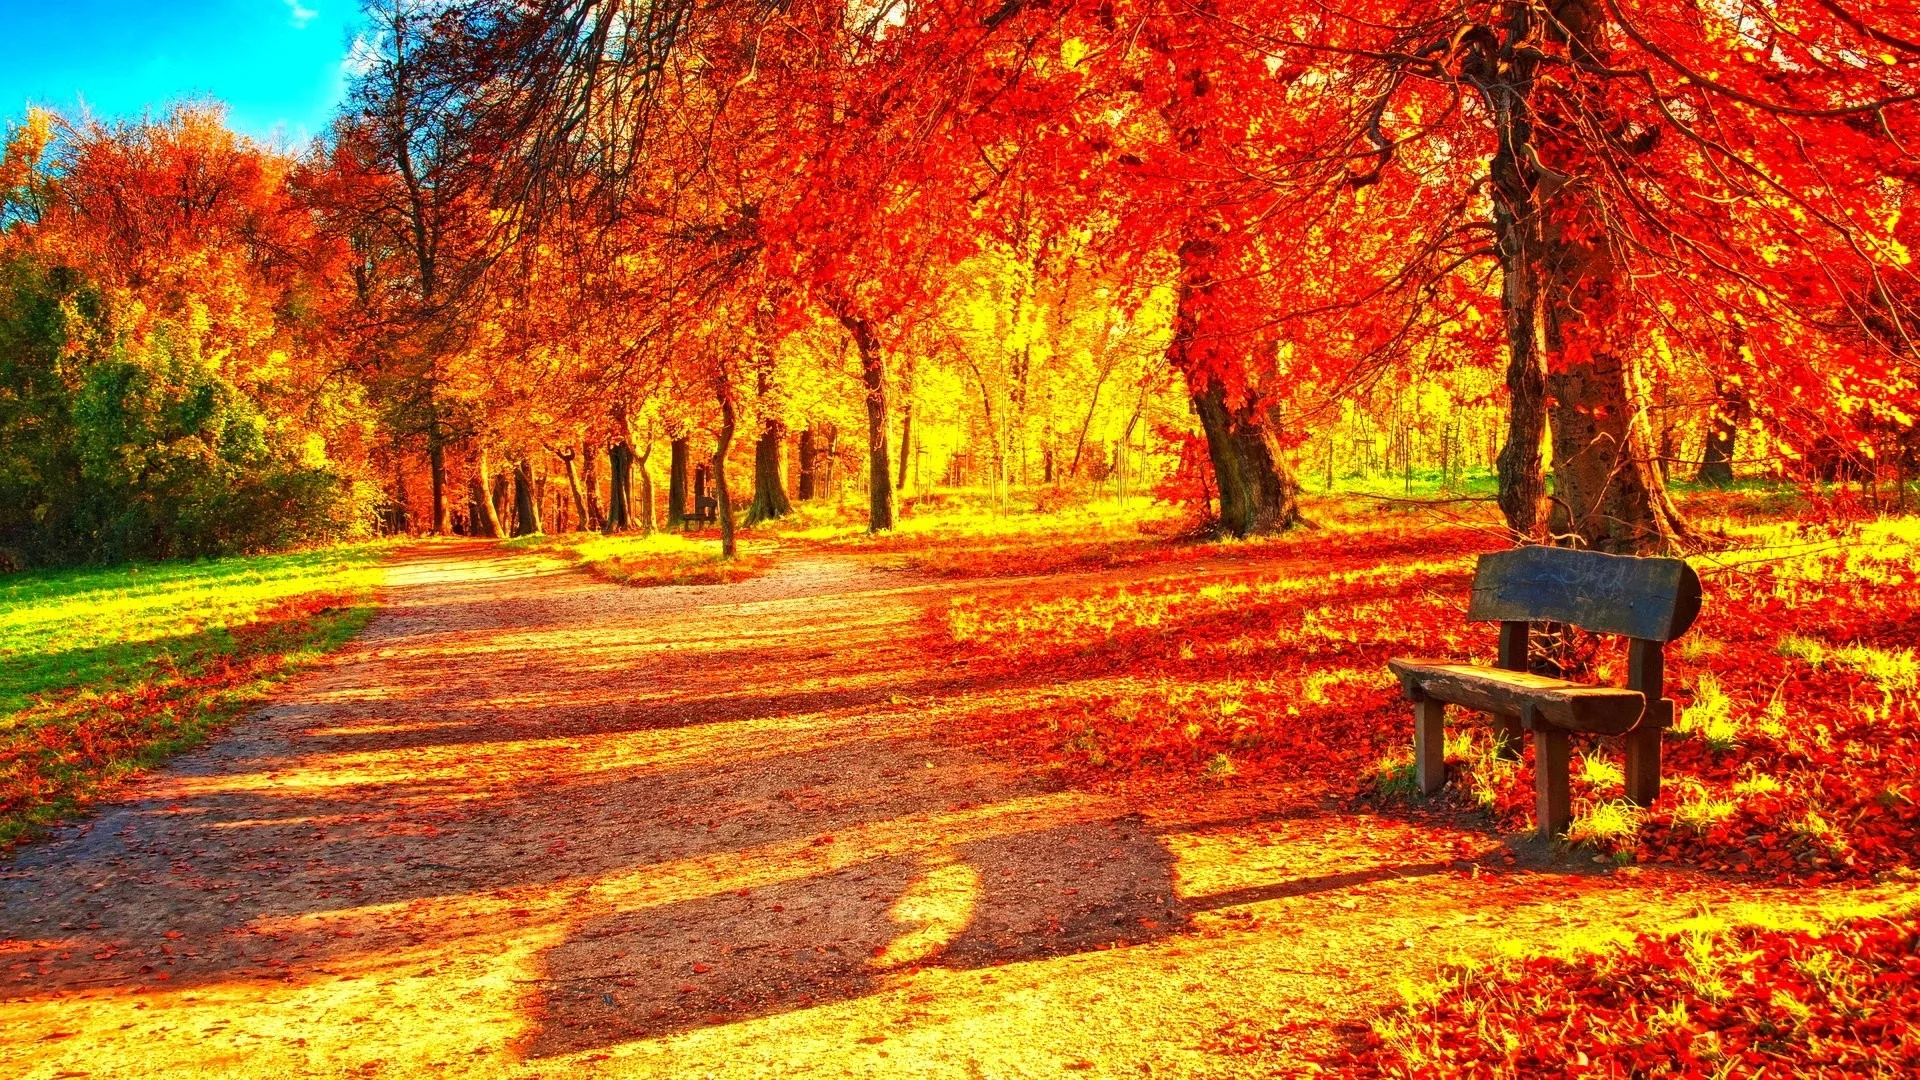 Fall Tag – Tree Landscape Autumn Season Nature Fall Forest Color Hd Beautiful Scenery Download for